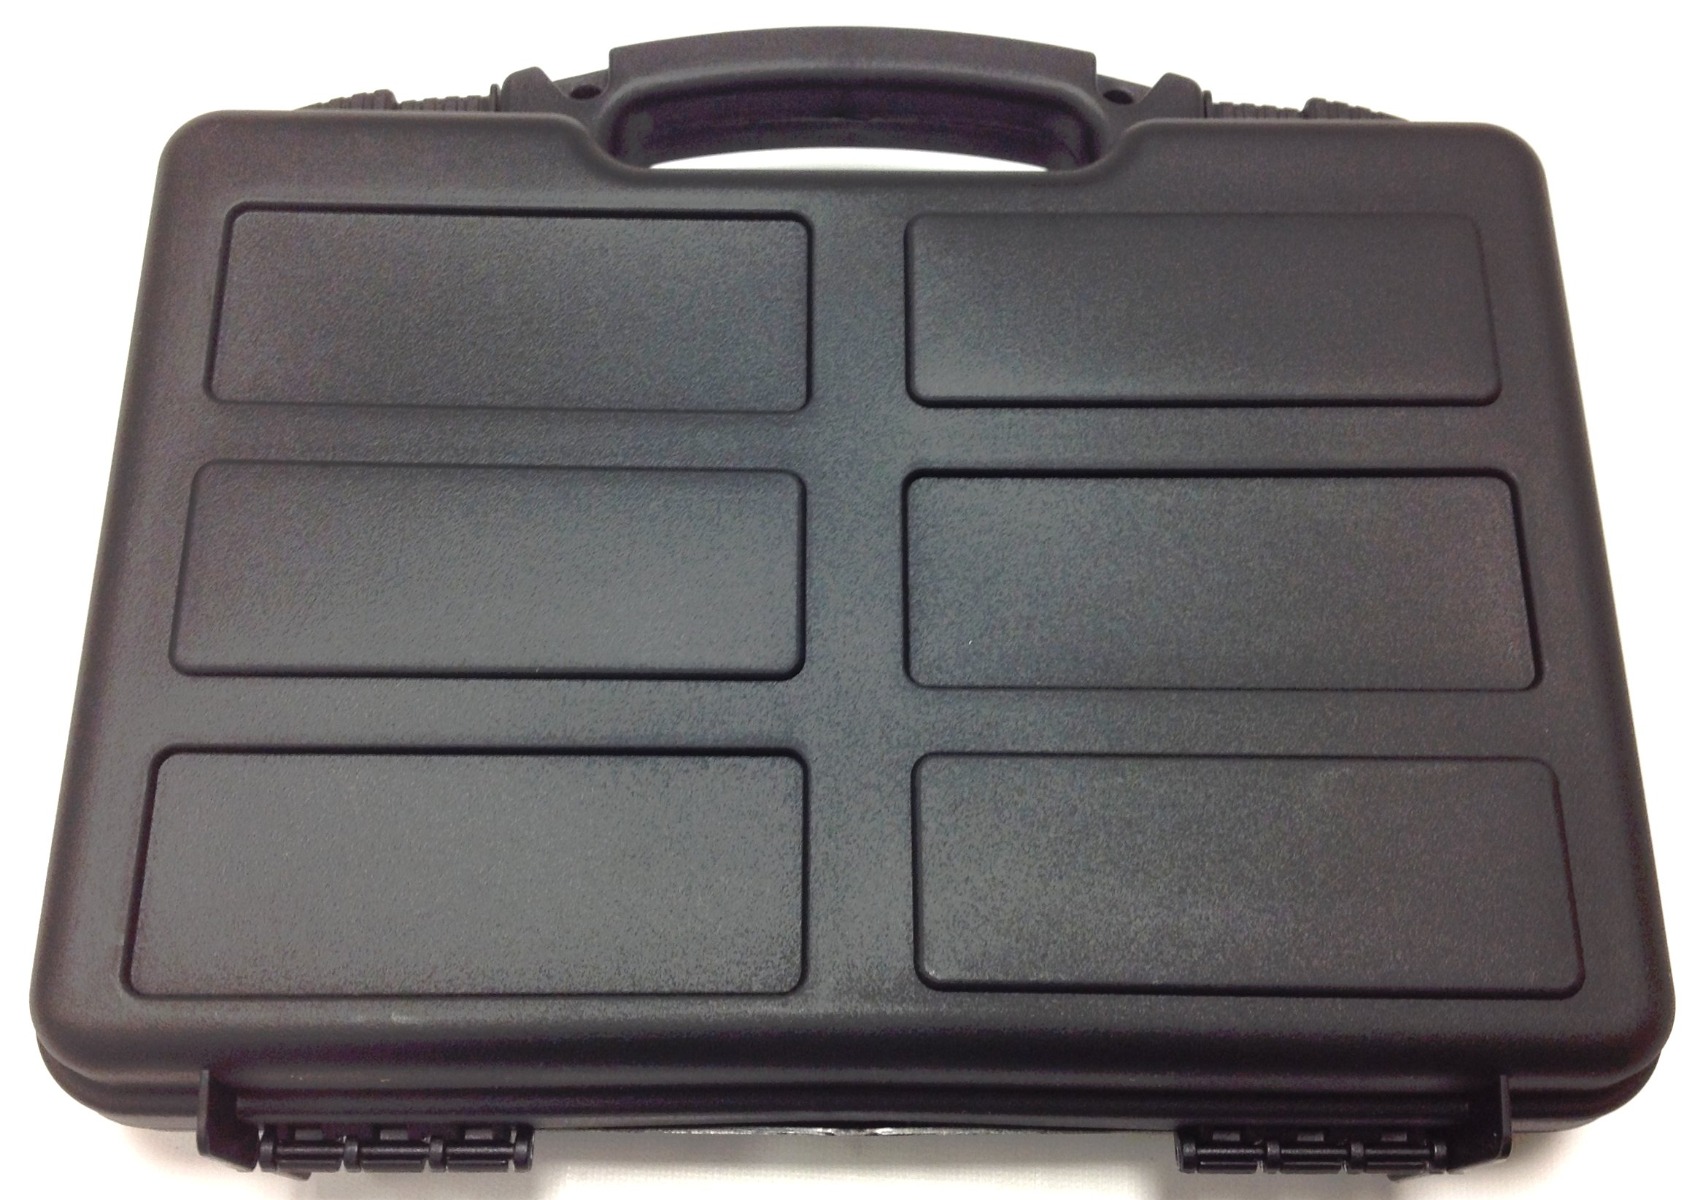 Nuprol Air Pistol Carry And Storage Hard Plastic Case